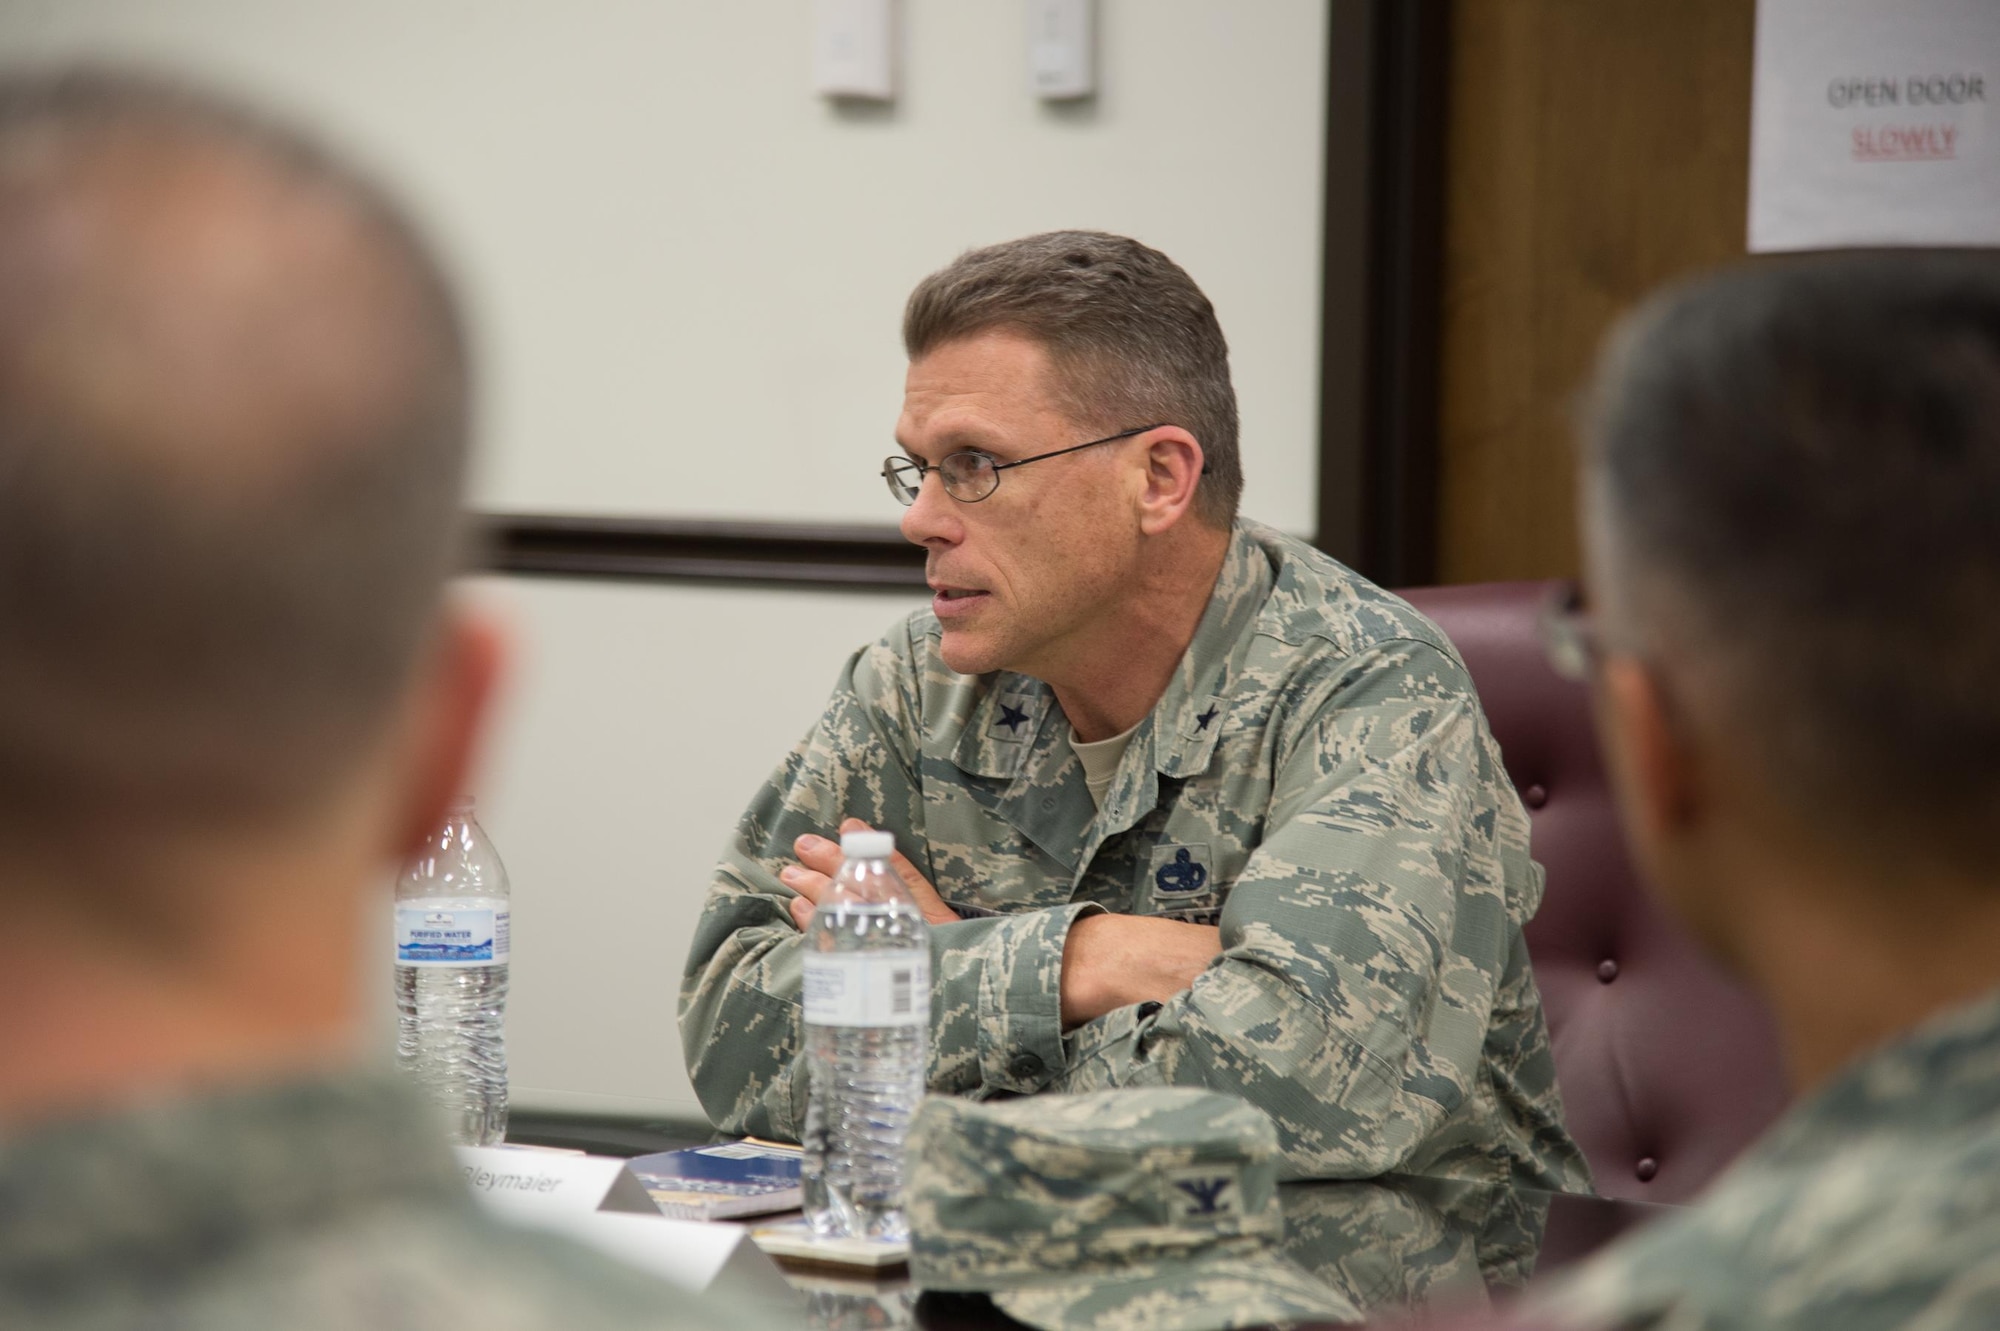 Brig. Gen. Steven Bleymaier, Director of Logistics, Engineering and Force Protection, Headquarters Air Mobility Command, takes questions from unit commanders during a tour Nov. 29, 2017, at Dover Air Force Base, Del.